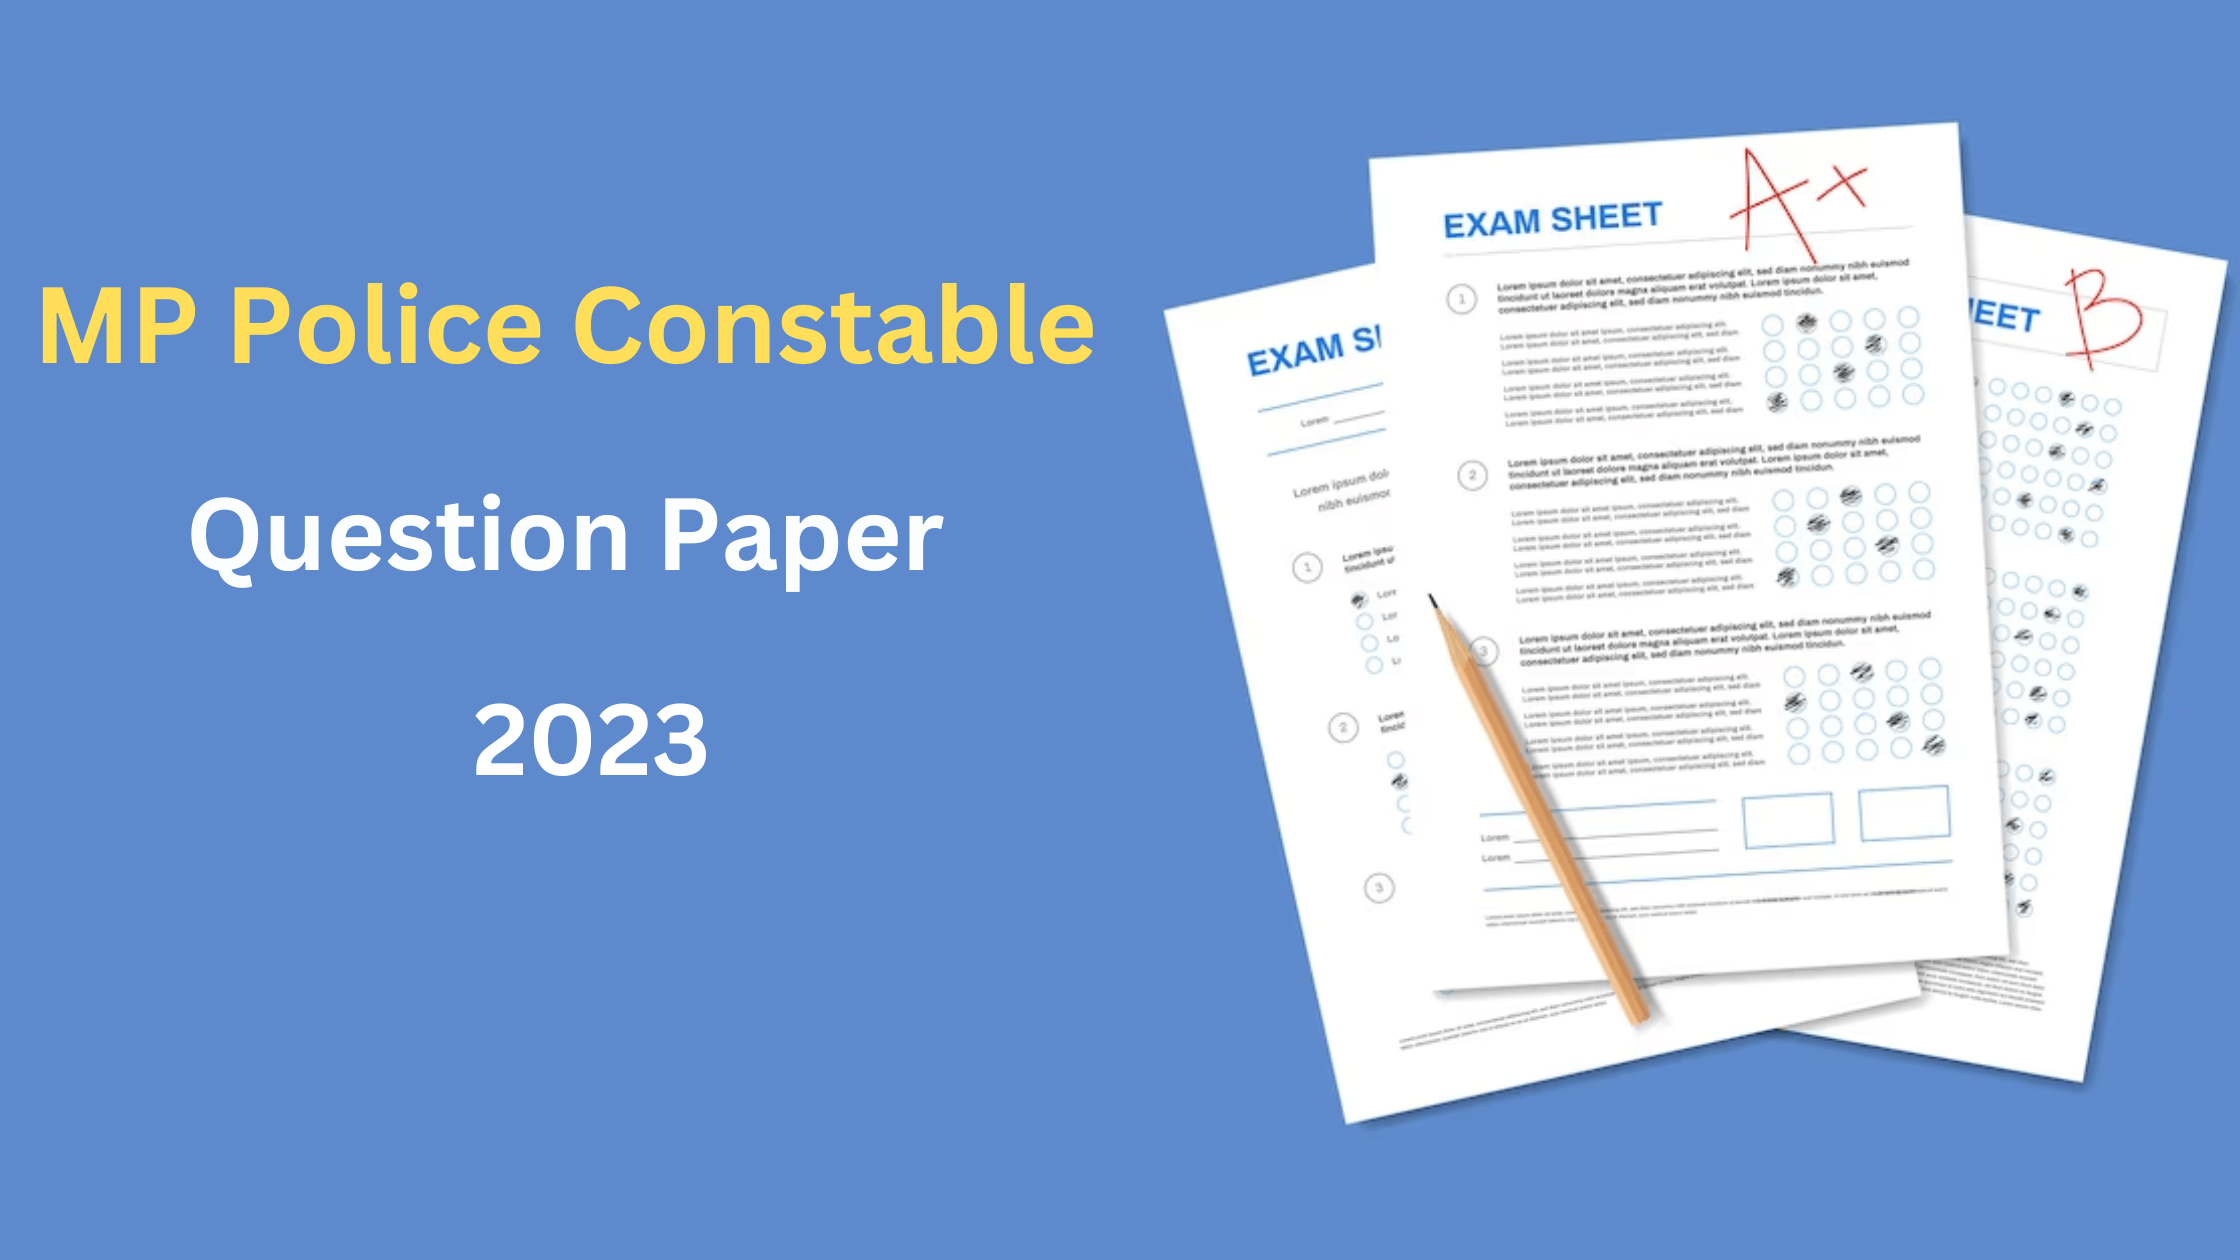 MP Police Constable Question Paper 2023